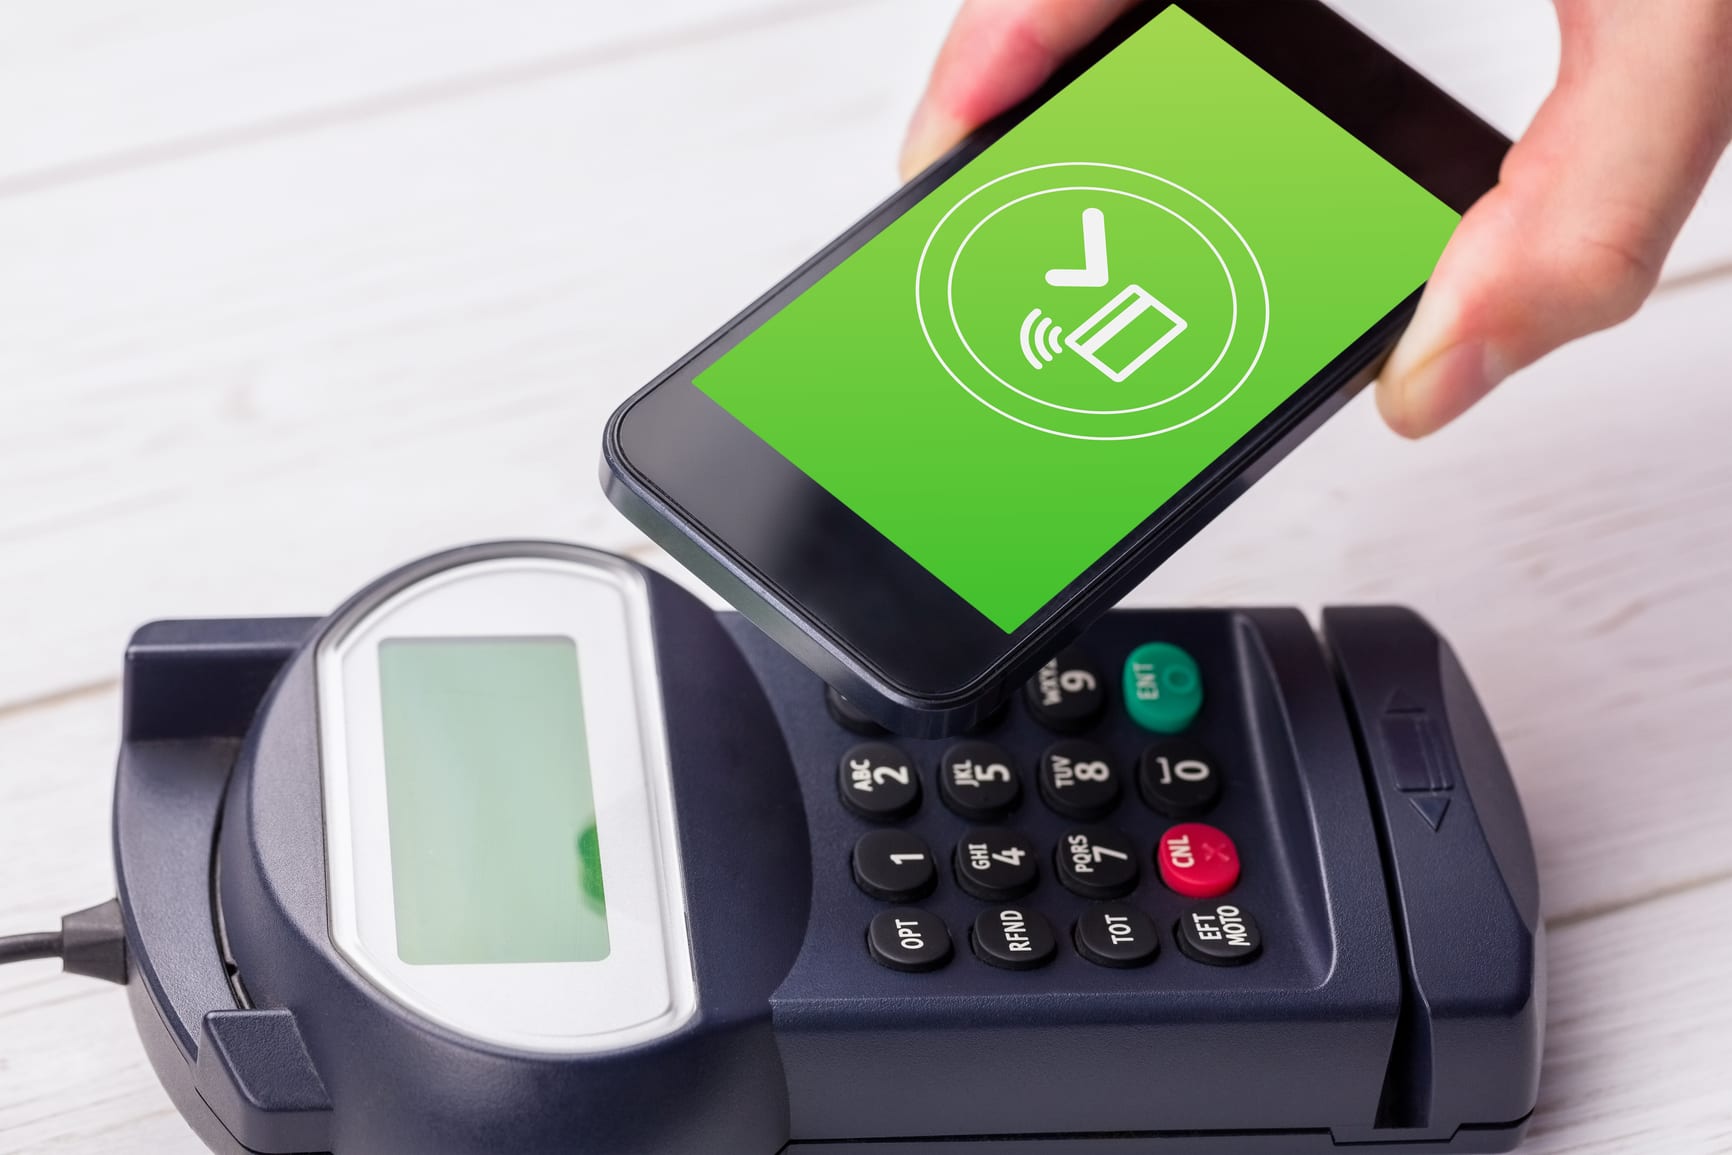 Smartphone payment is a growing convenience area that retailers are quickly catching on to